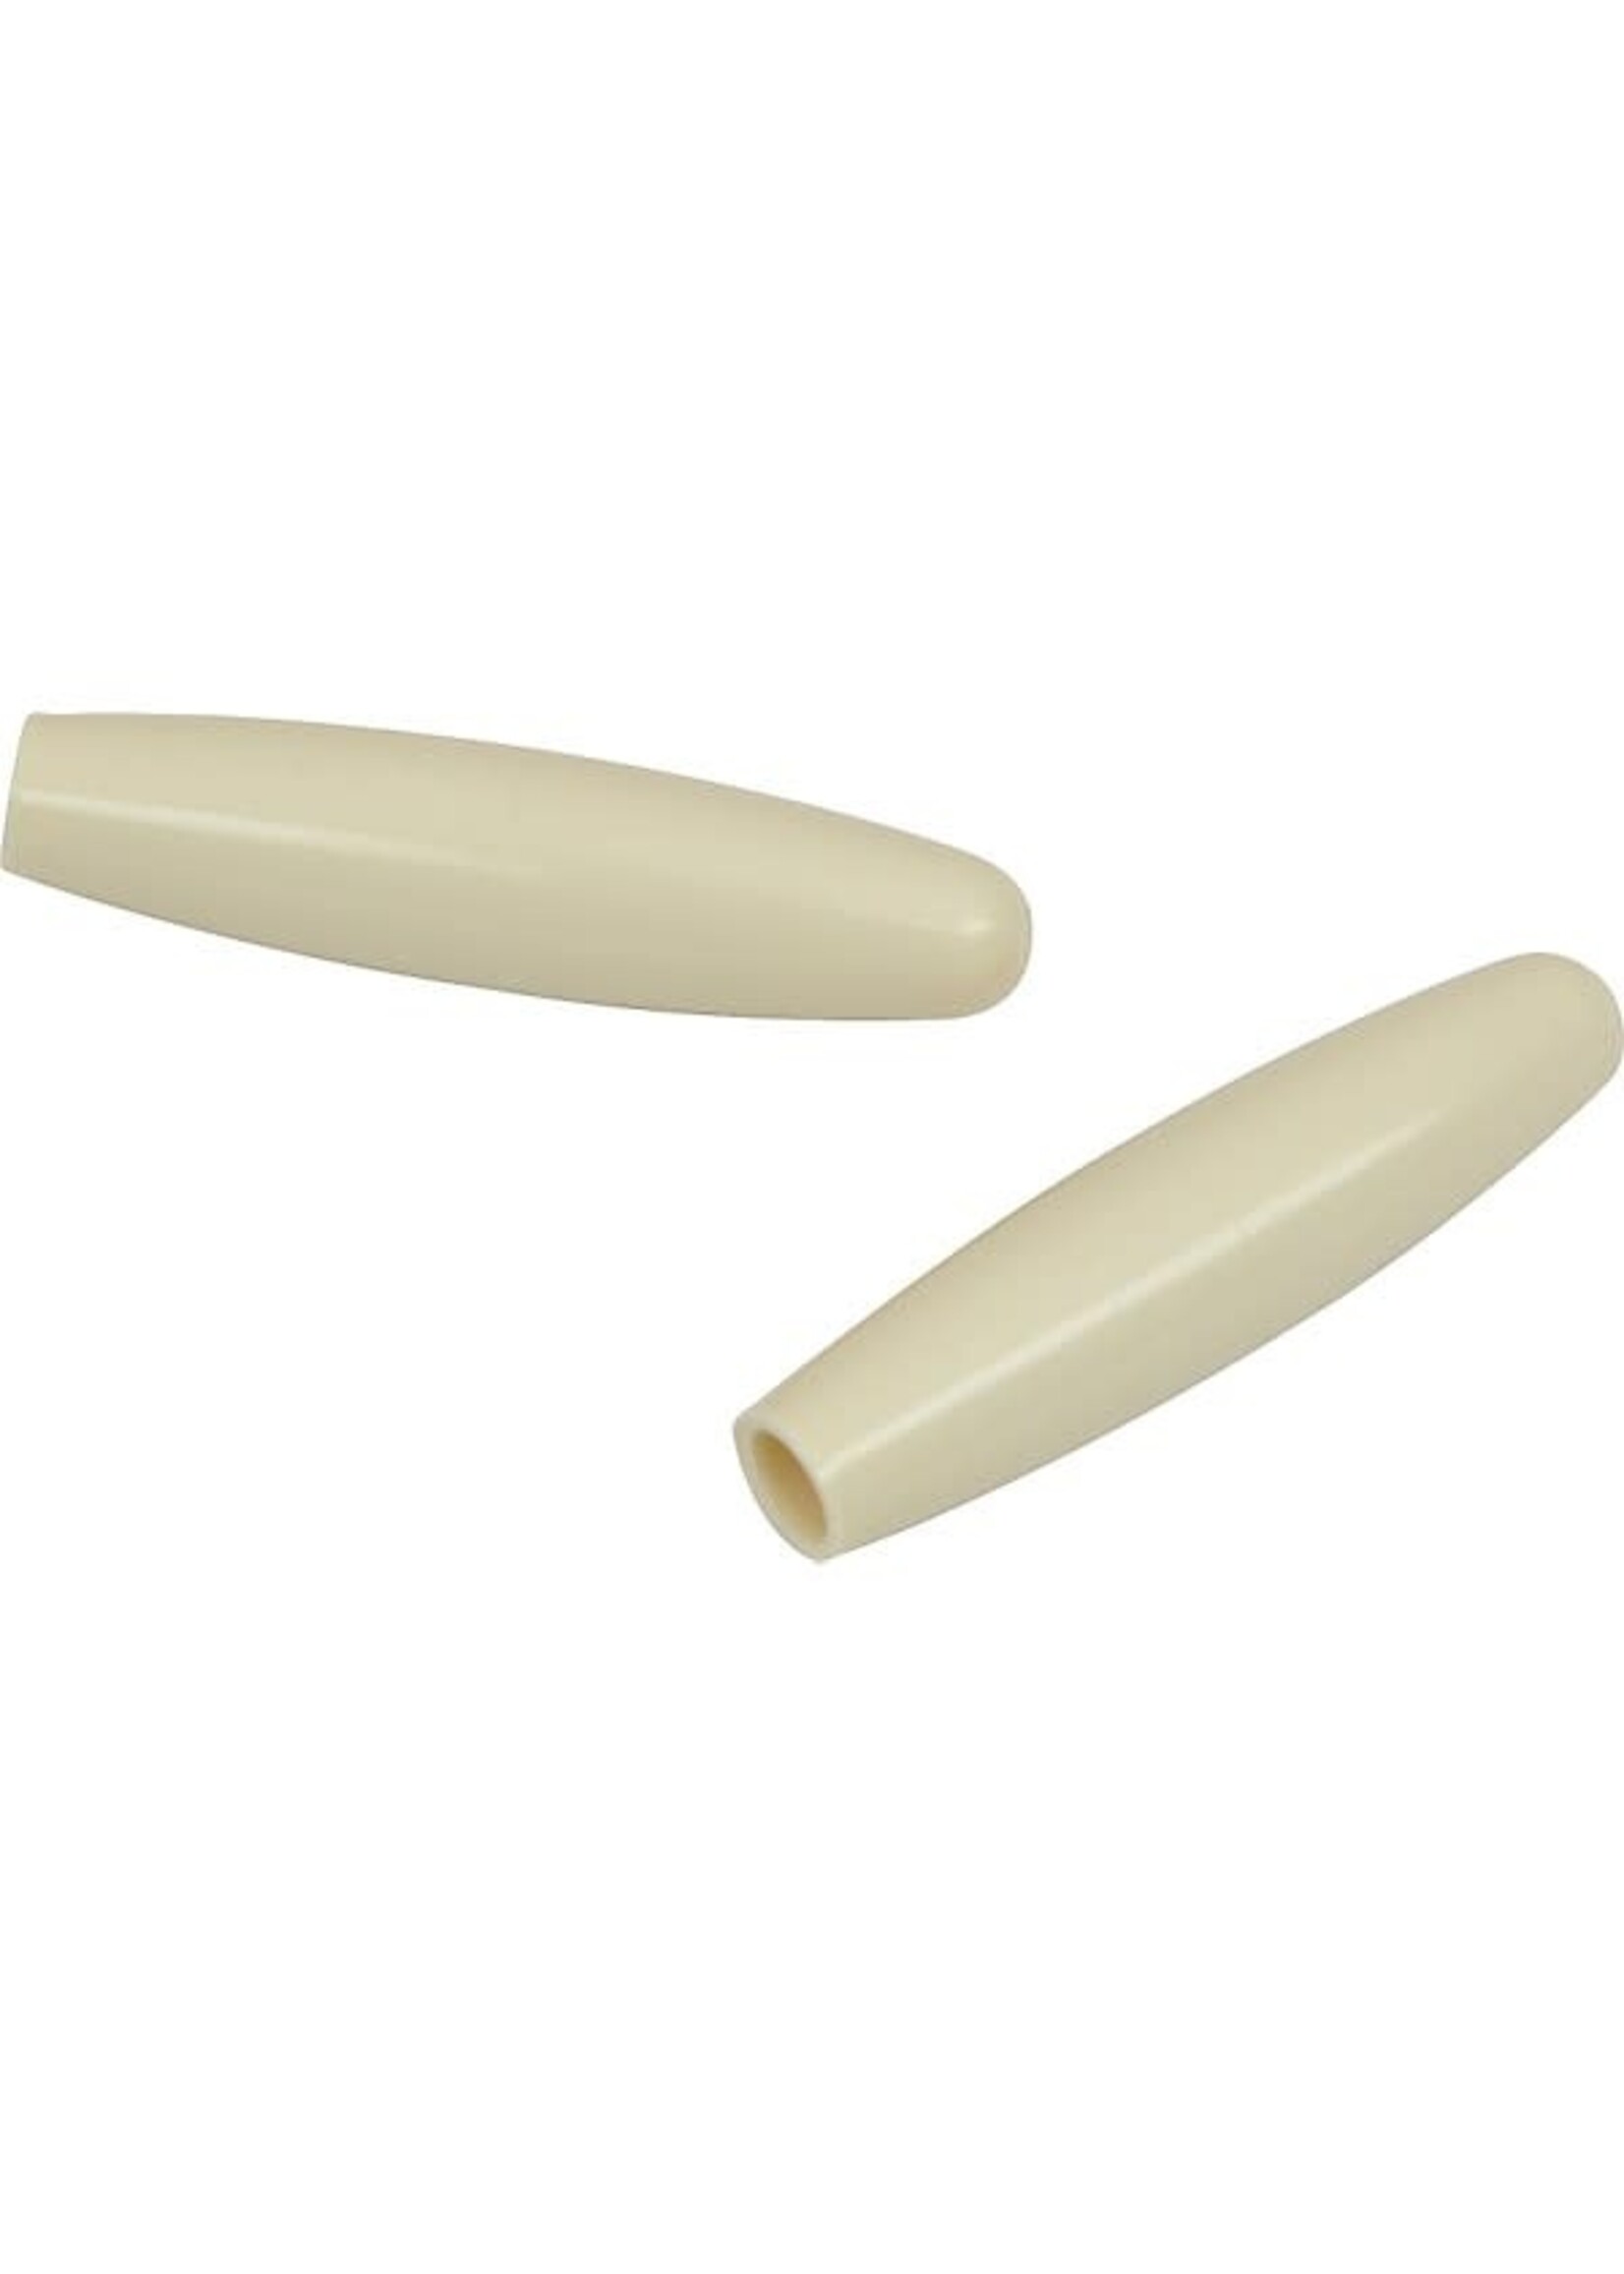 FENDER FENDER TREMOLO TIP IVORY + $5 SHIPPING SOLD INDIVIDUALLY